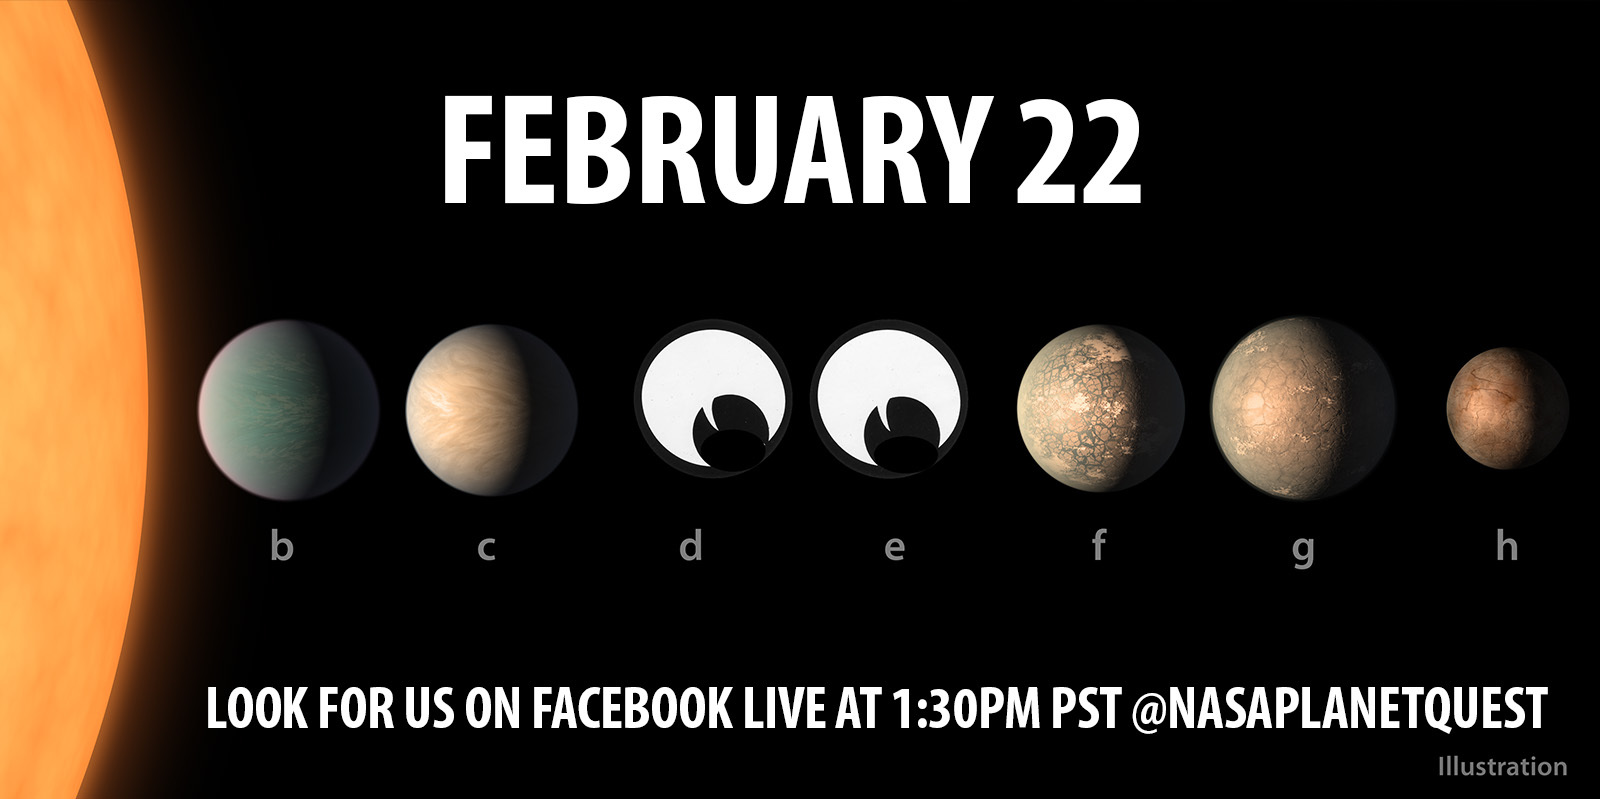 Ad says: Feb. 22, Look for us on Facebook Live at 1:30 p.m. PST @nasaplanetquest